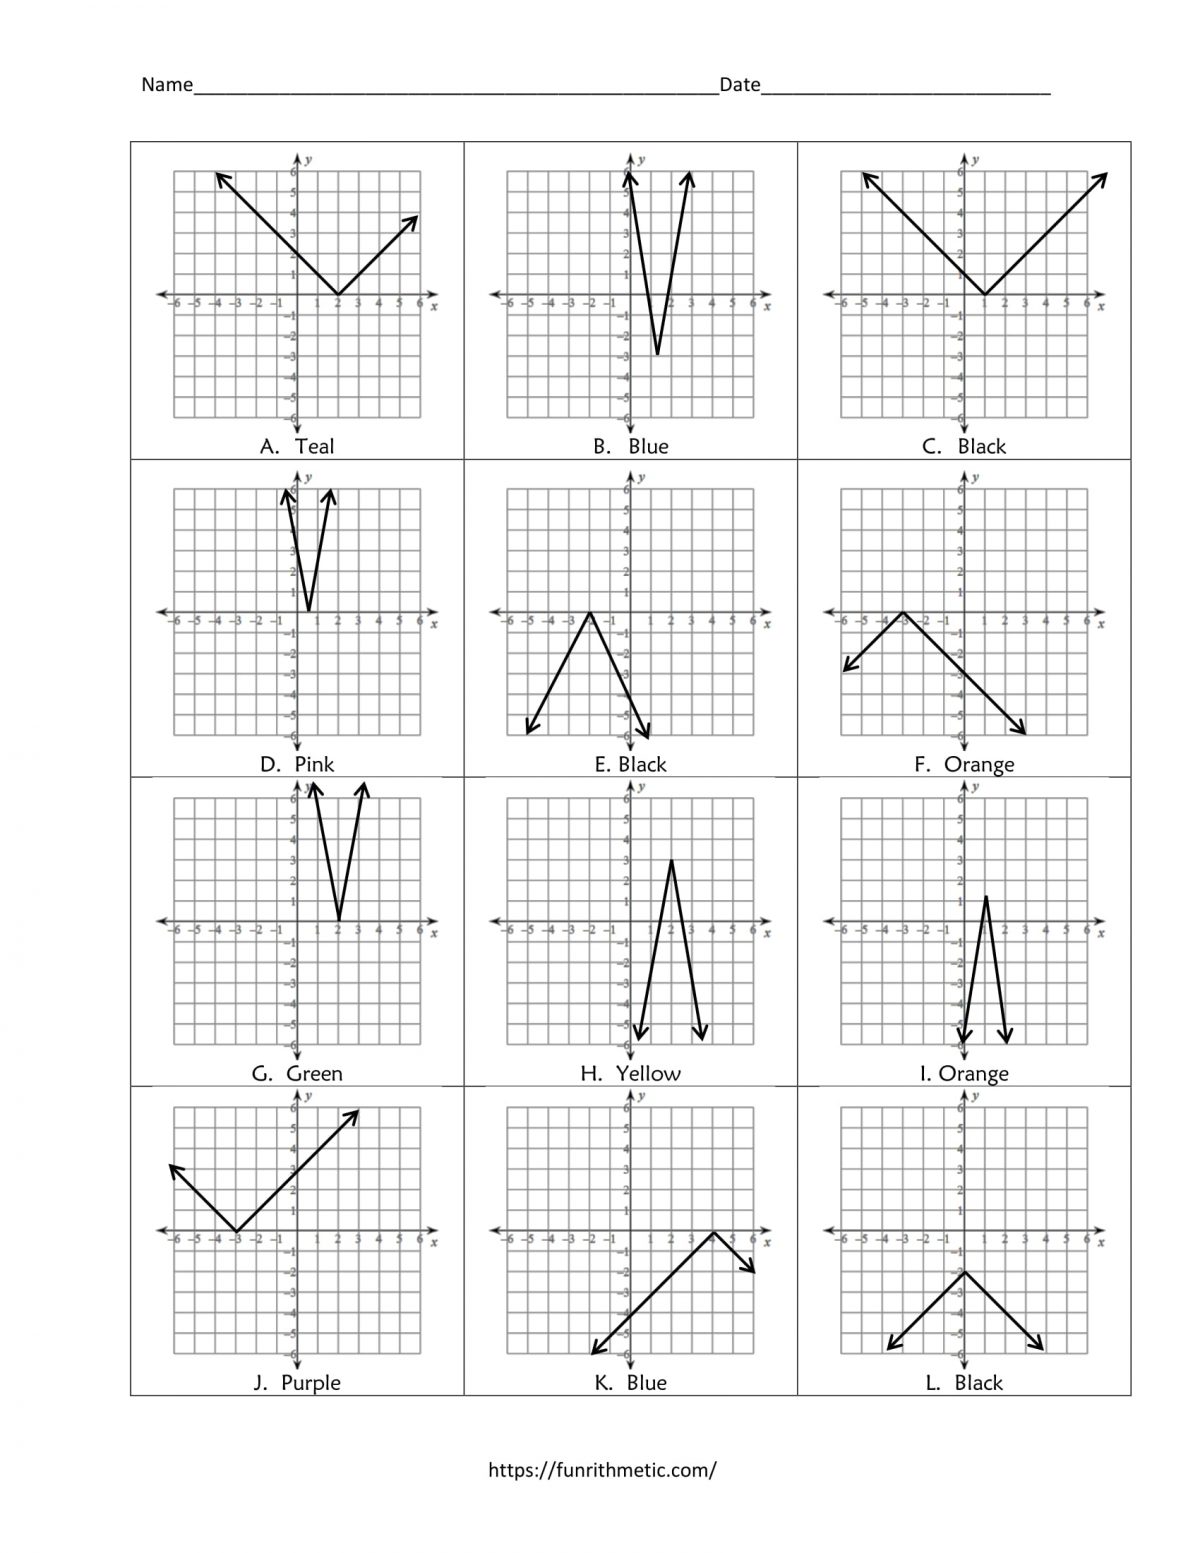 Graphing Absolute Value Equations worksheet